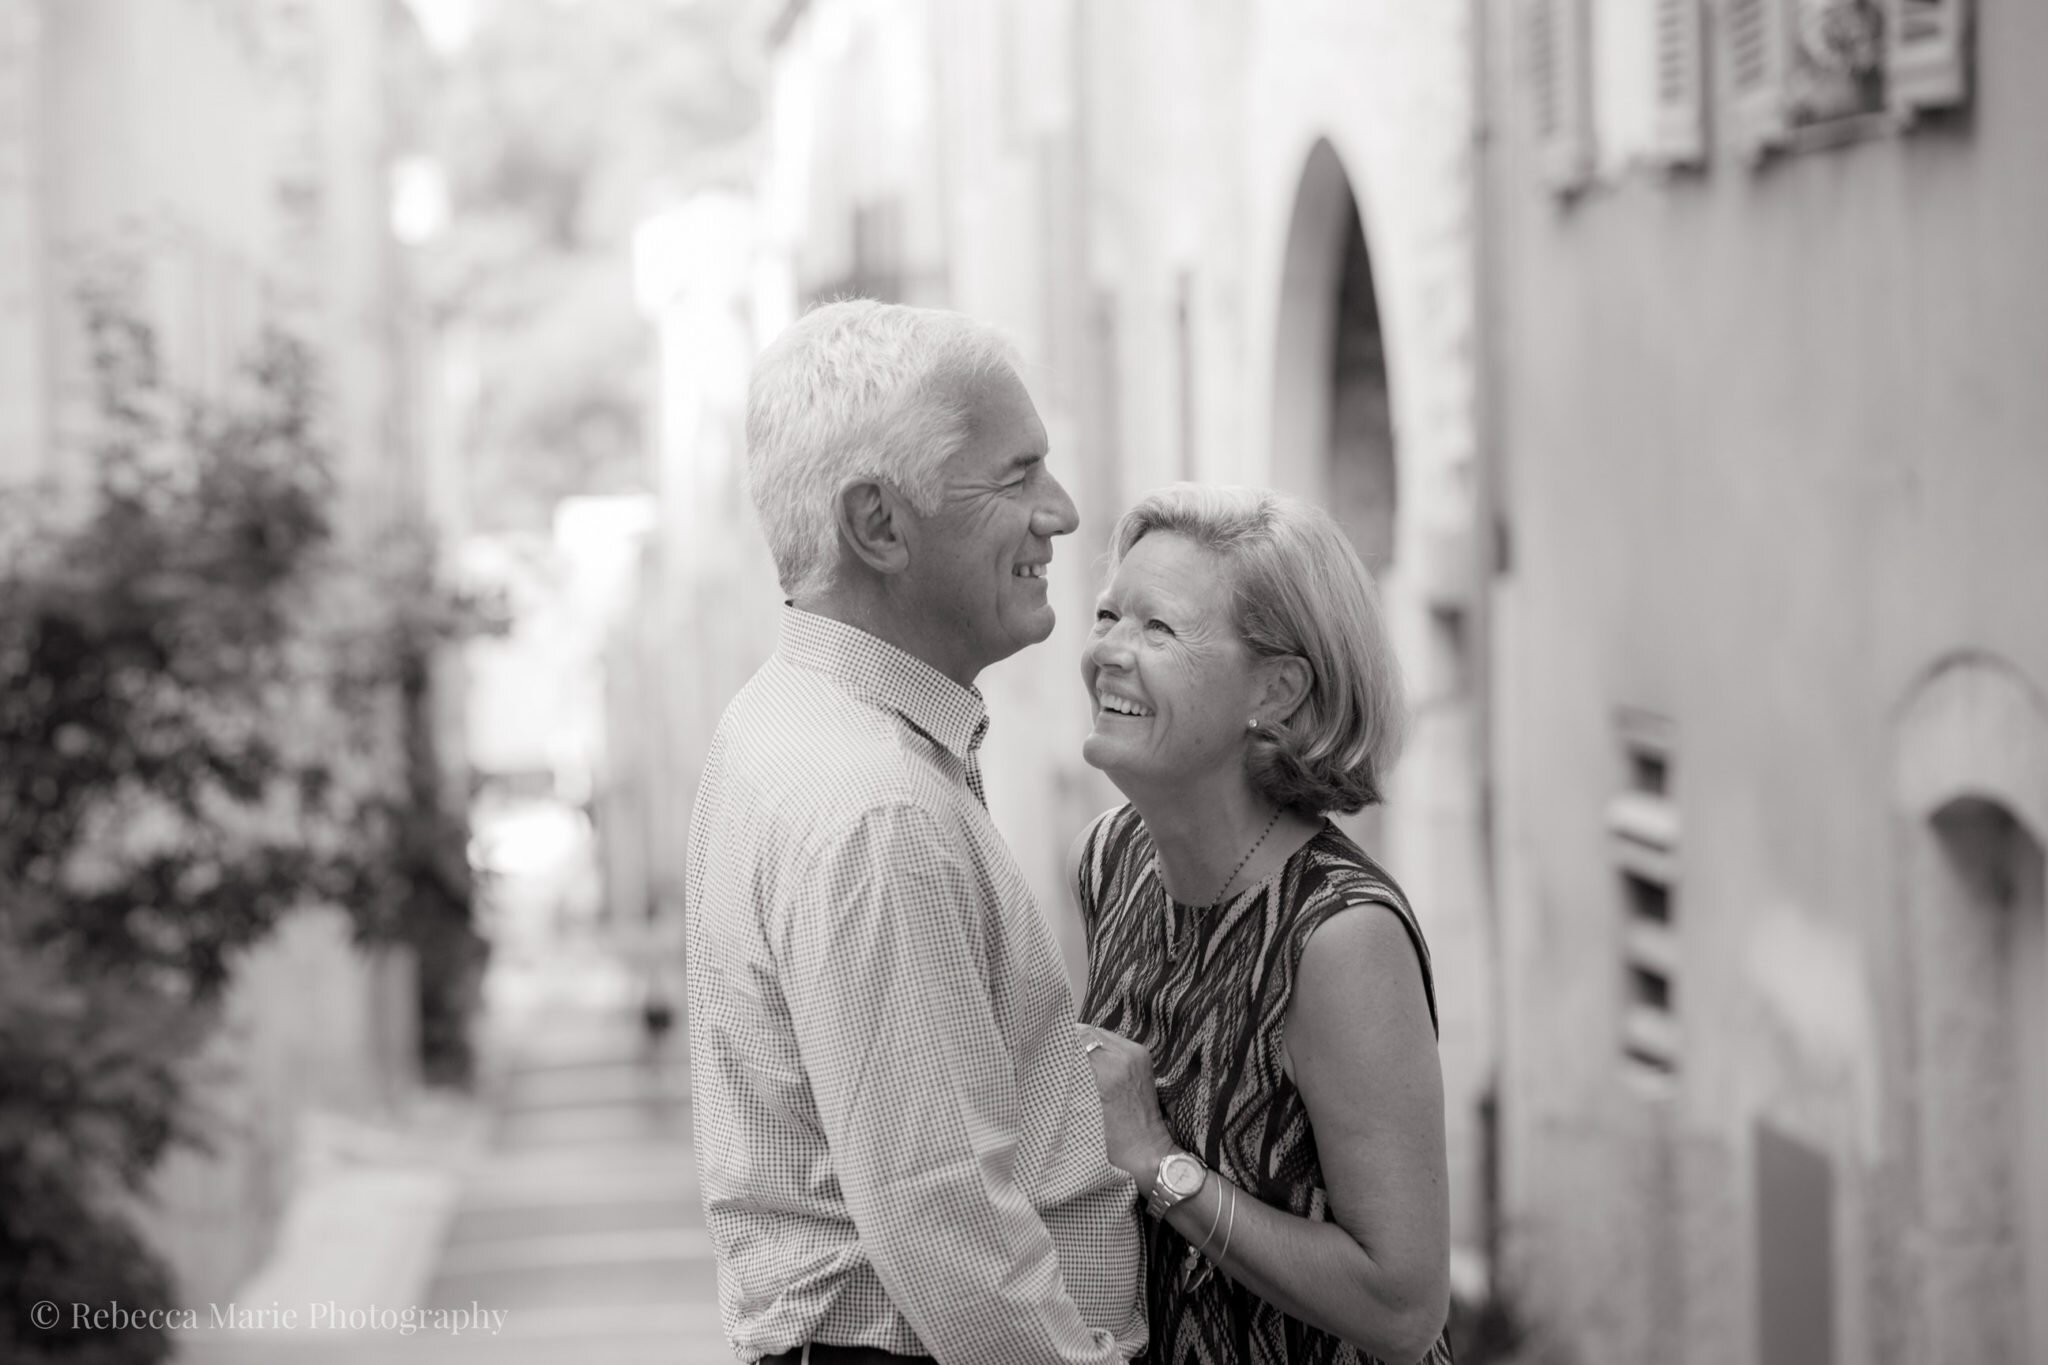 Portraits-in-France-Valbonne-Rebecca-Marie-Photography-5-1